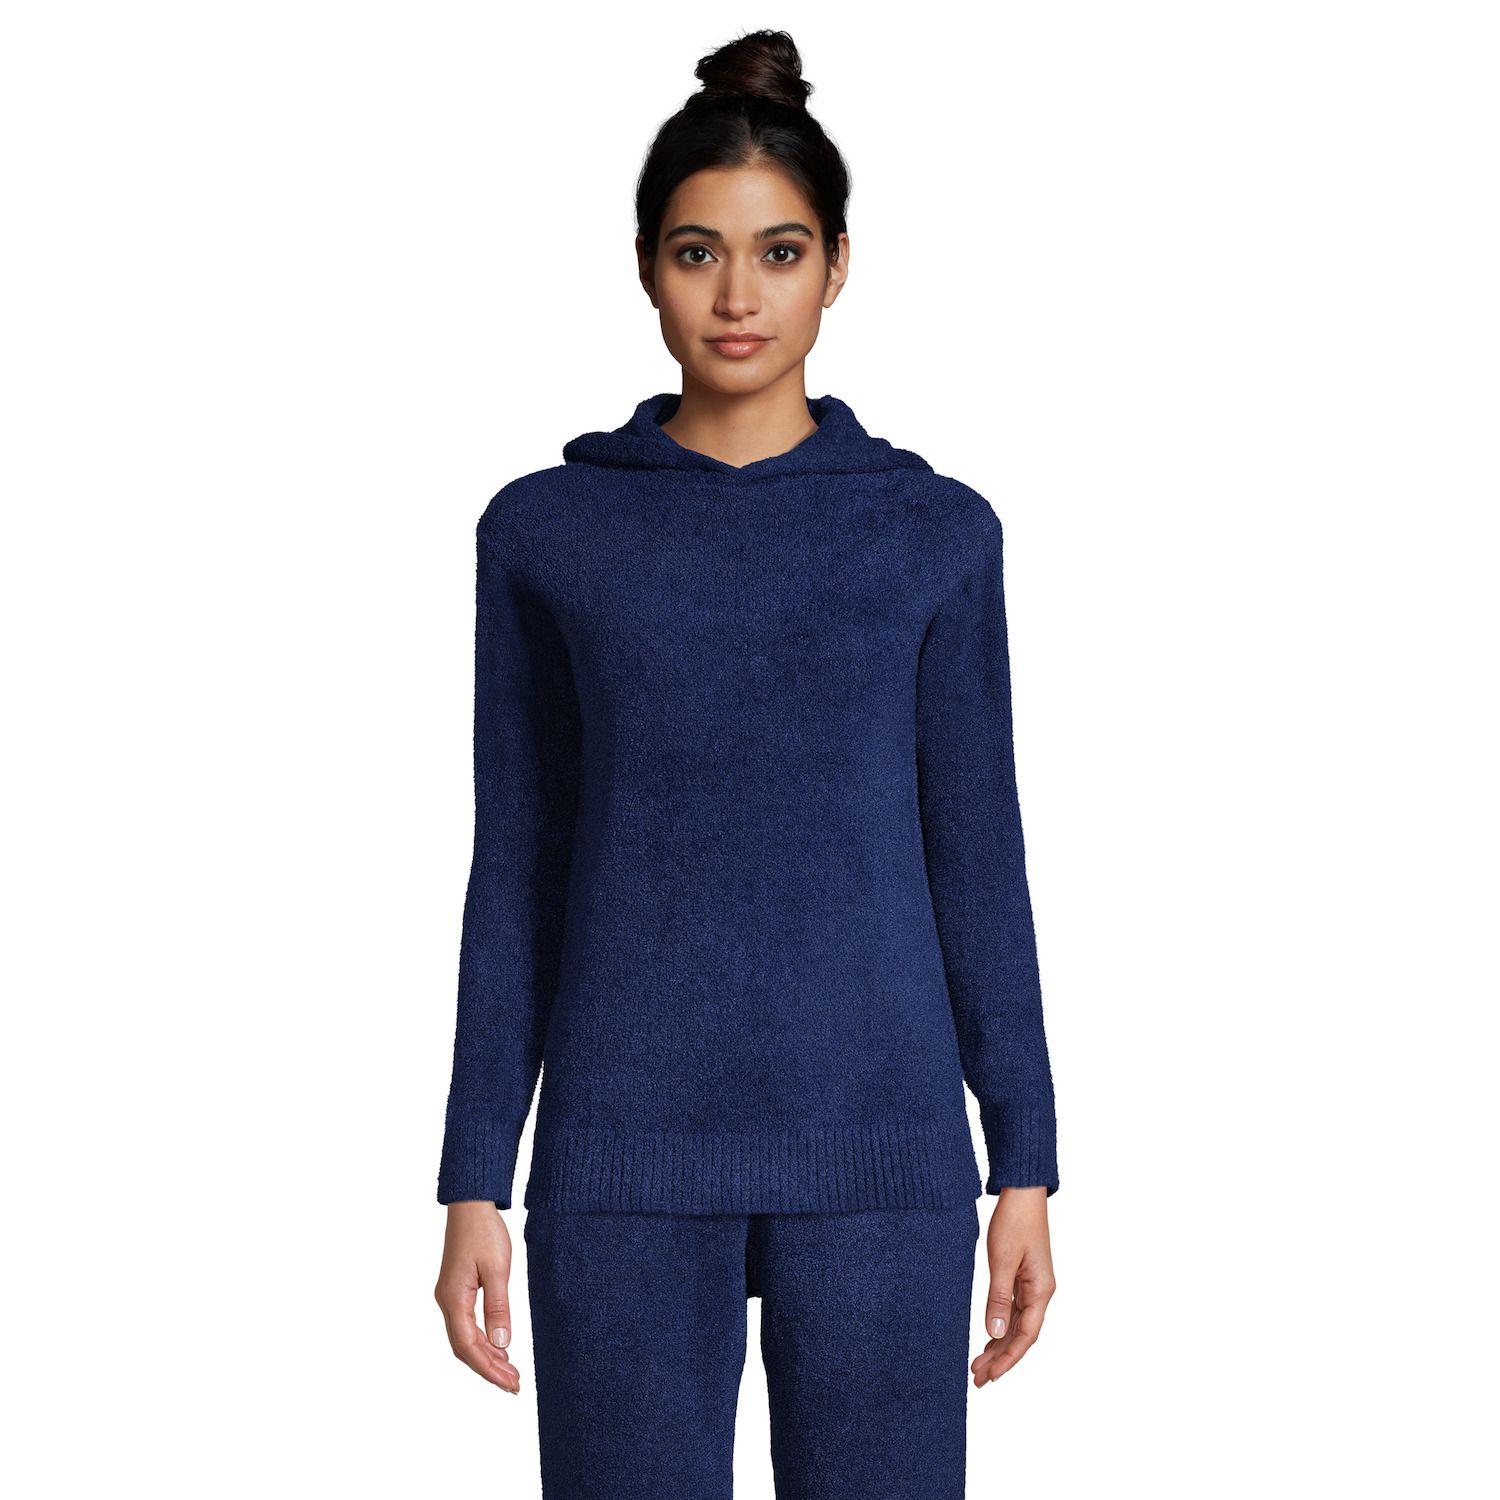 Image for Lands' End Petite Lounge Hooded Pullover Sweater at Kohl's.